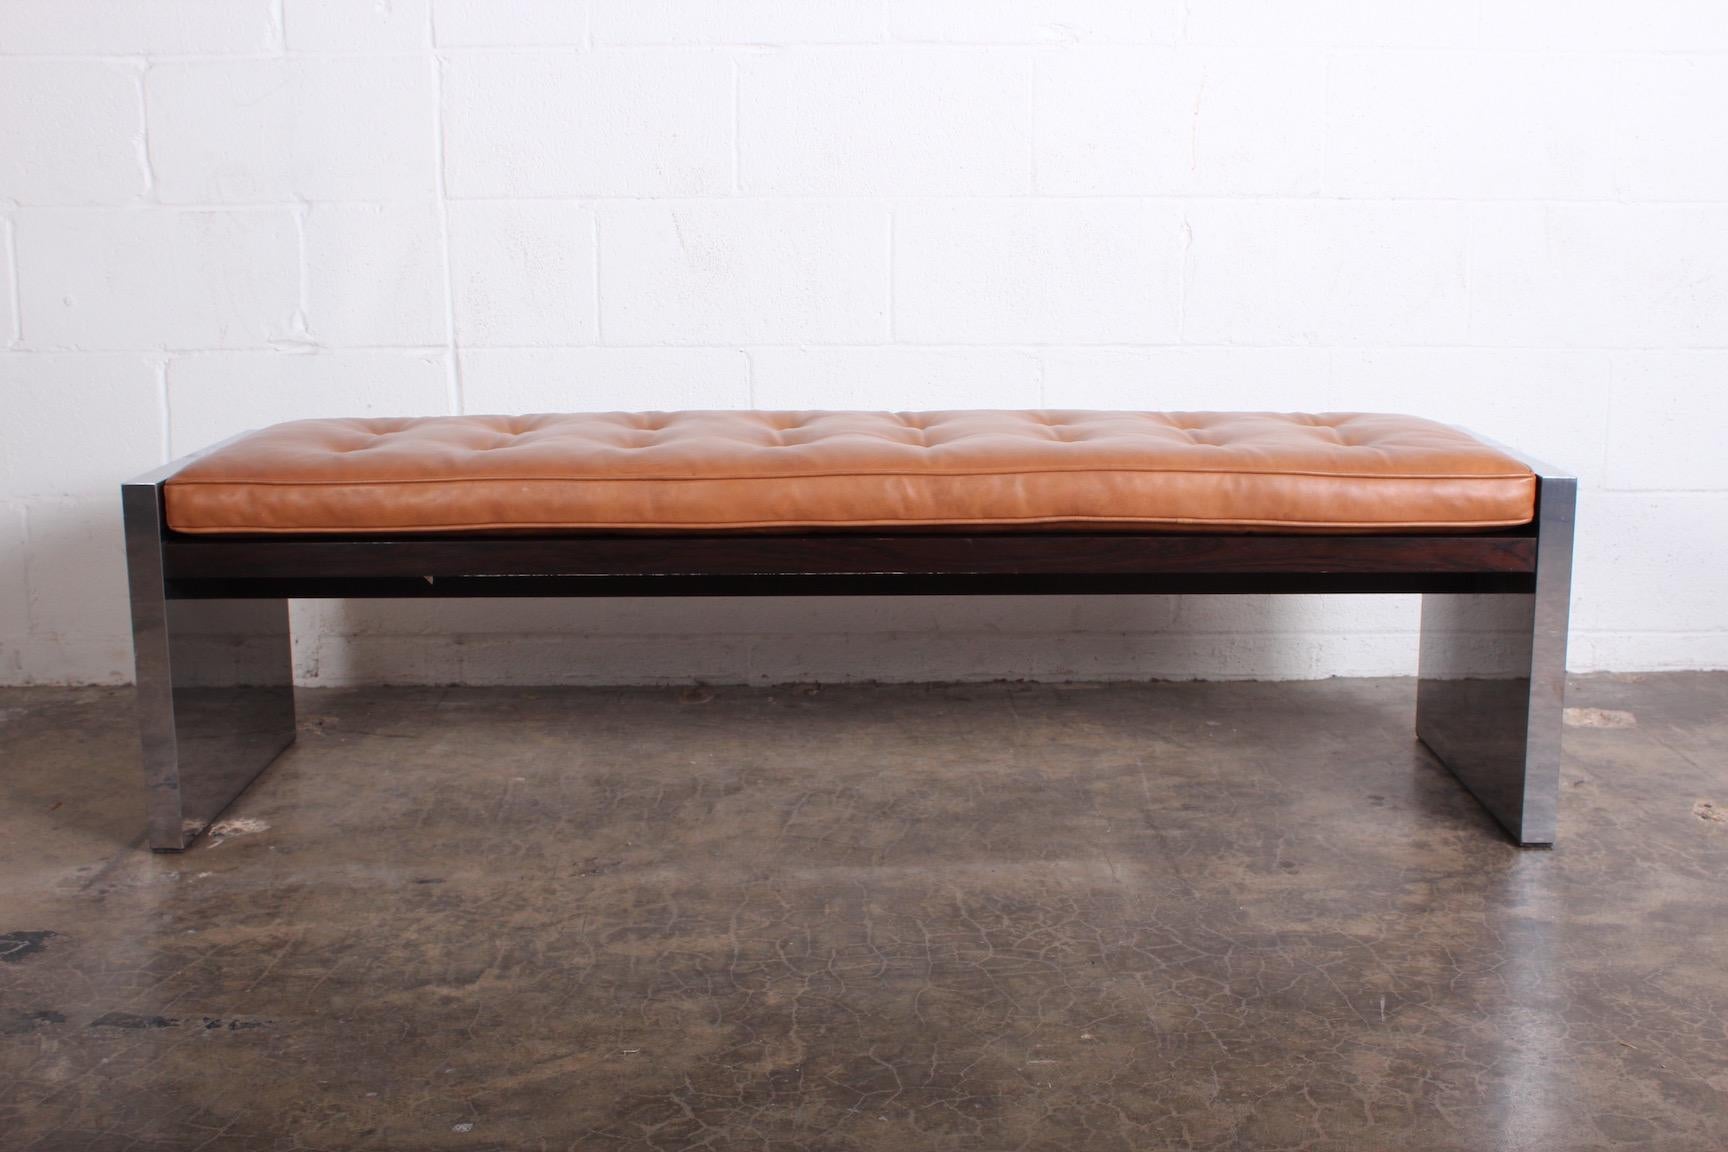 A bench designed by Roger Sprunger for Dunbar in polished stainless steel, rosewood and original leather.